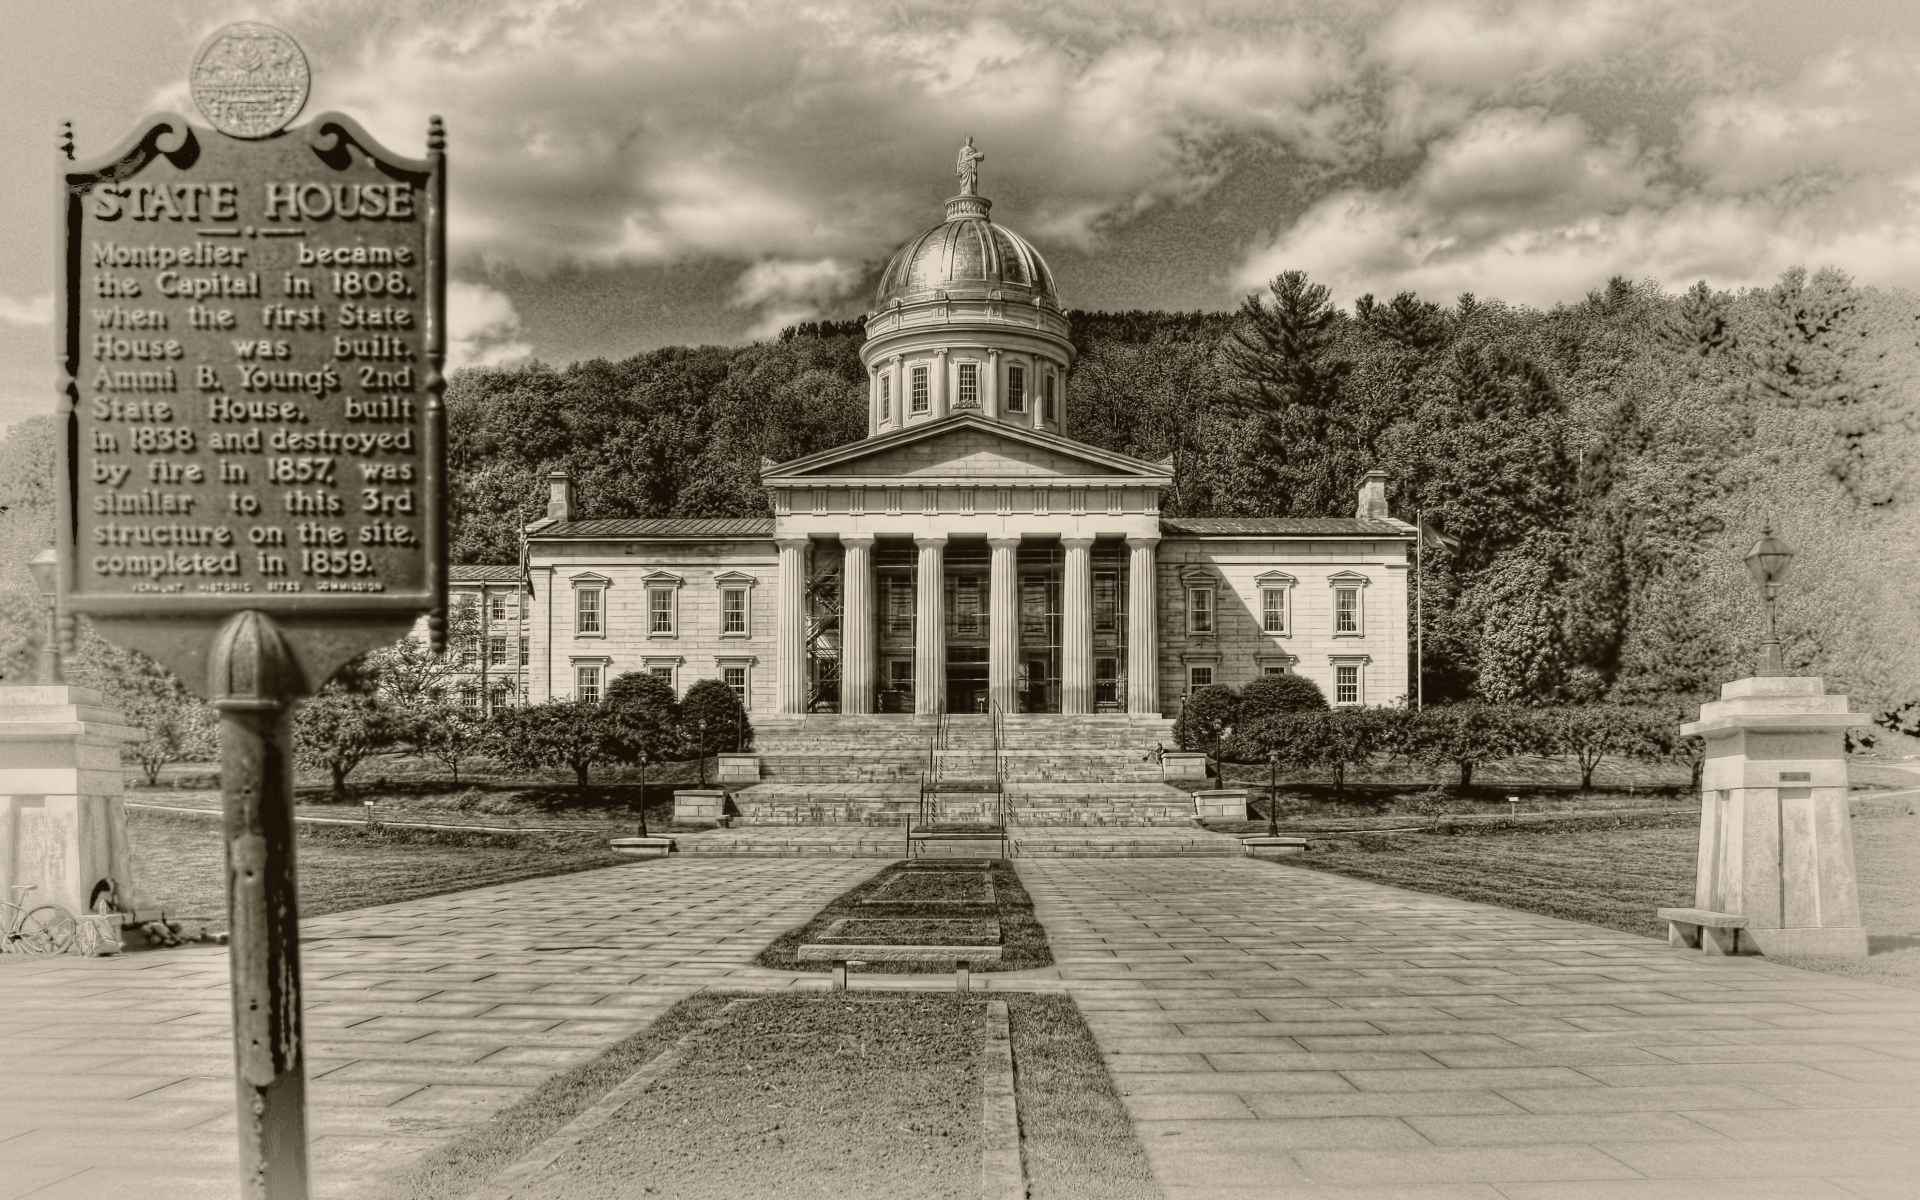 Man Made Vermont State House 1920x1200